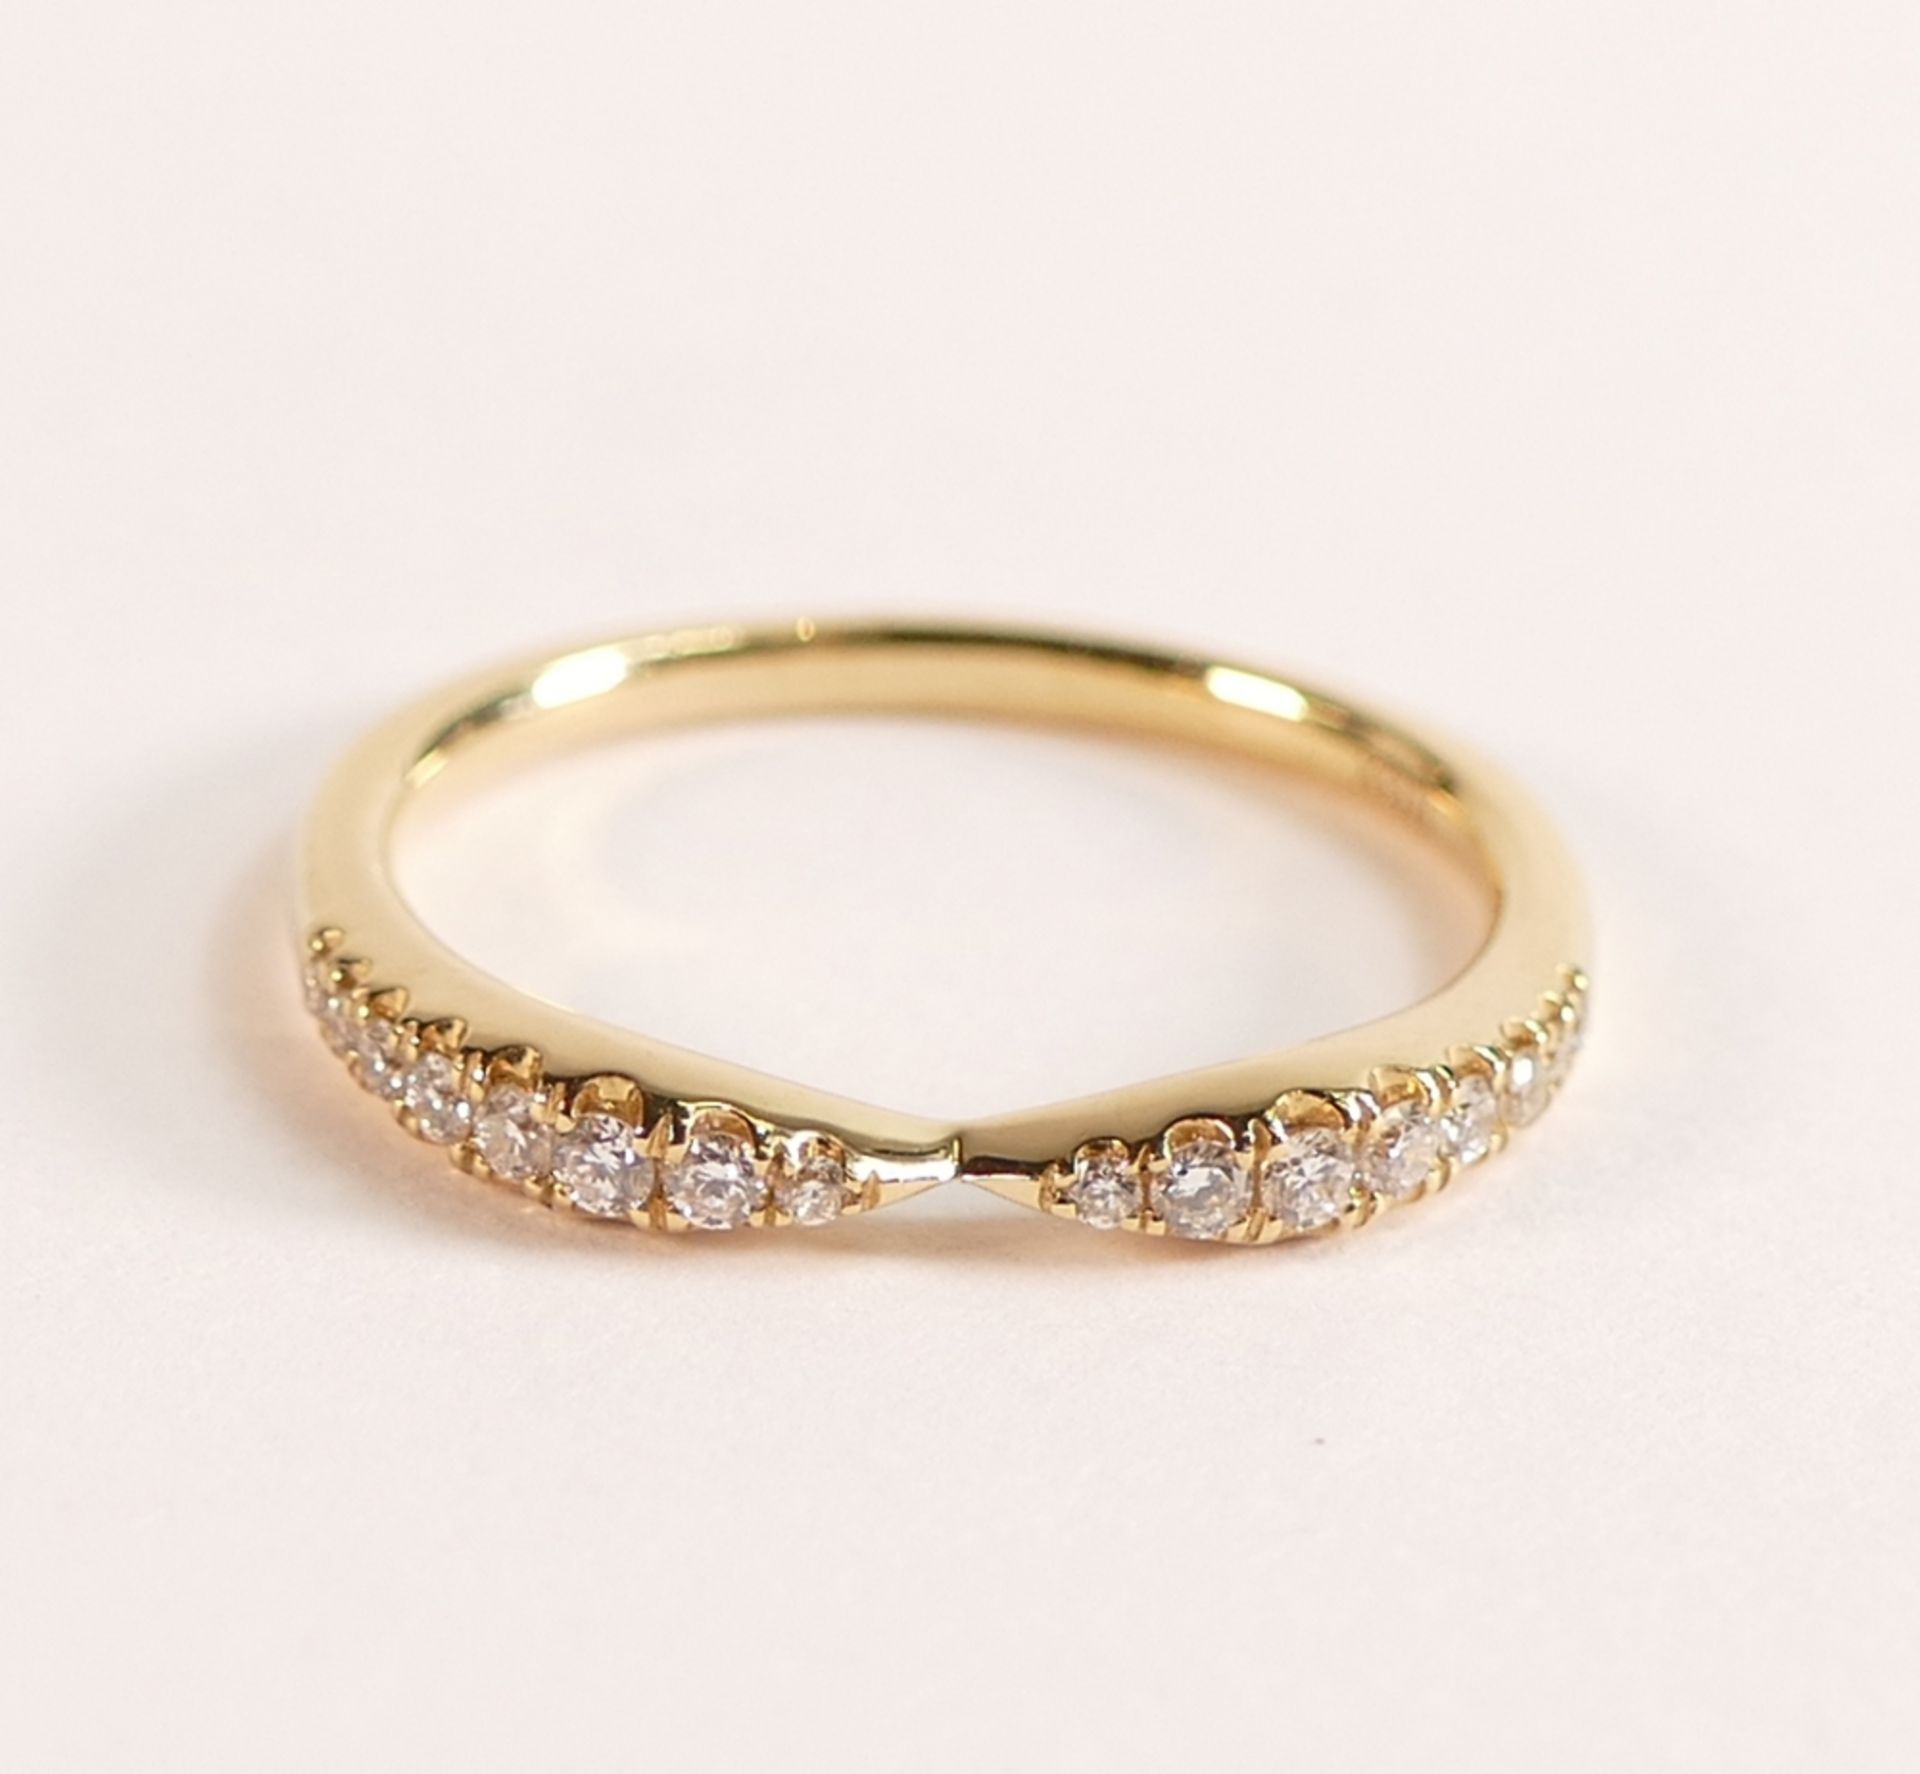 ROX 18ct Yellow Gold Diamond Bow Stacking Ring, approx carat weight is 0.20ct, size M, weight 2.4g.